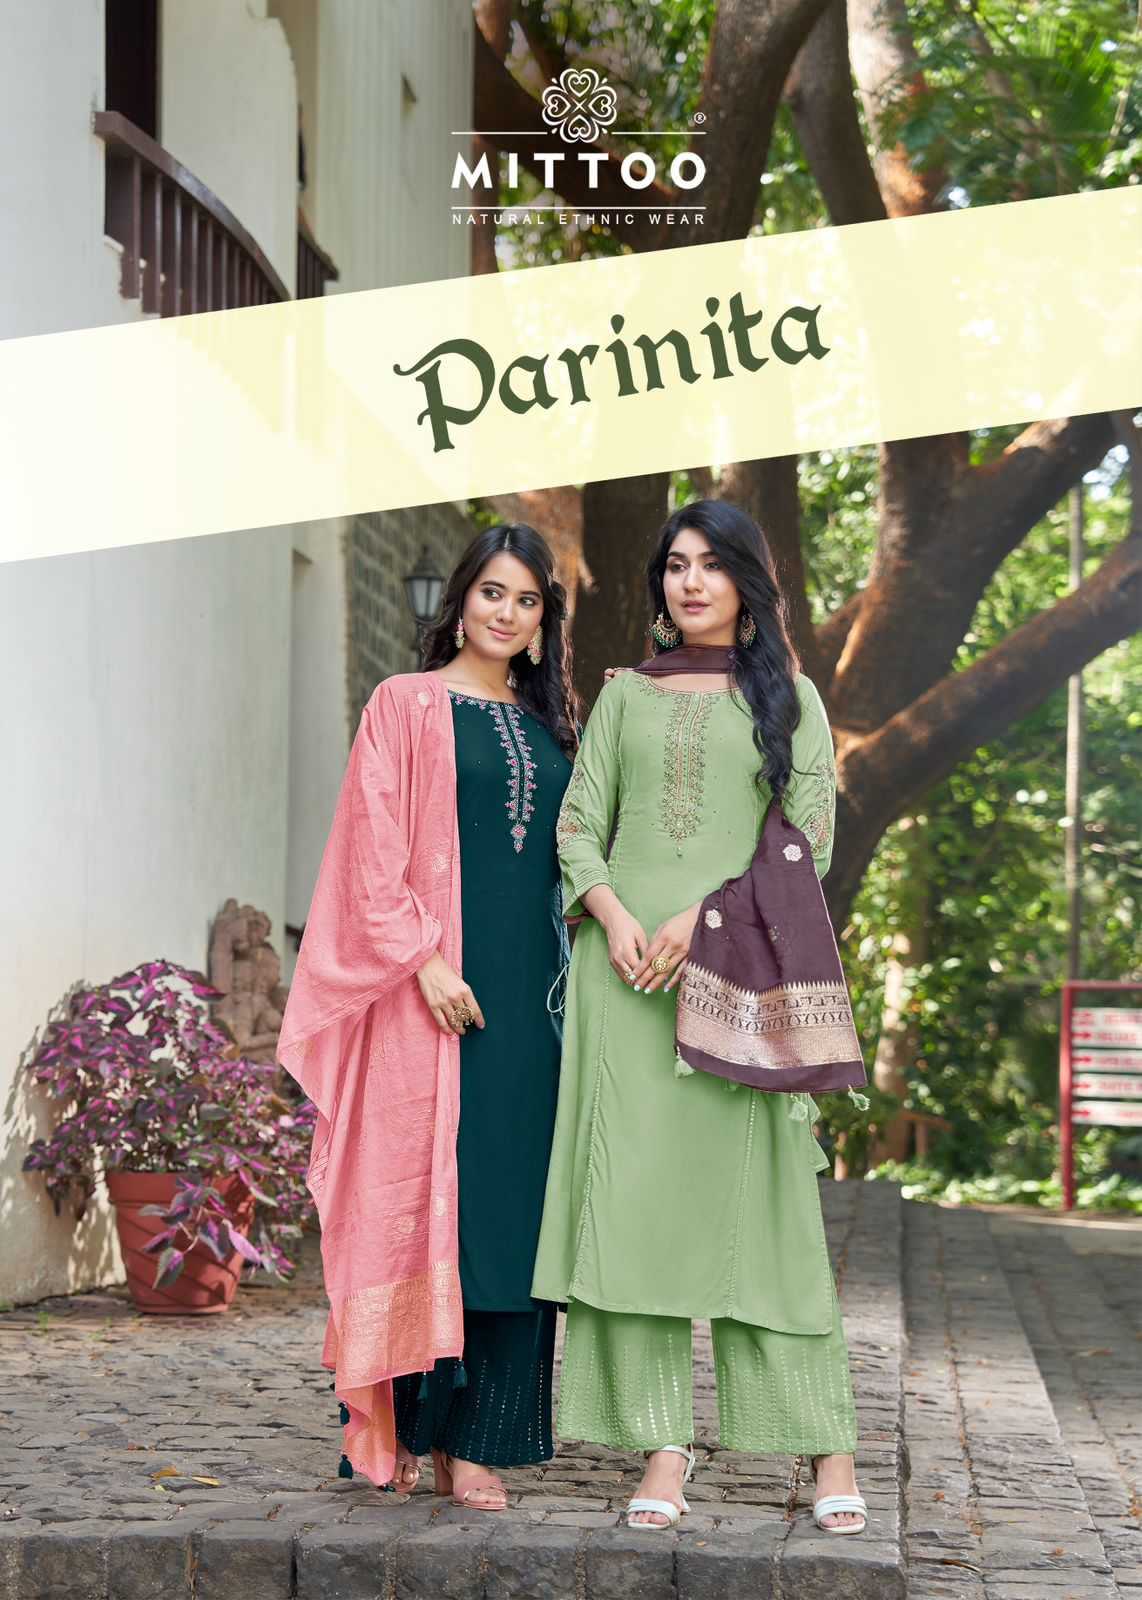 mittoo present parinita readymade fancy top with plazzo and dupatta supplier